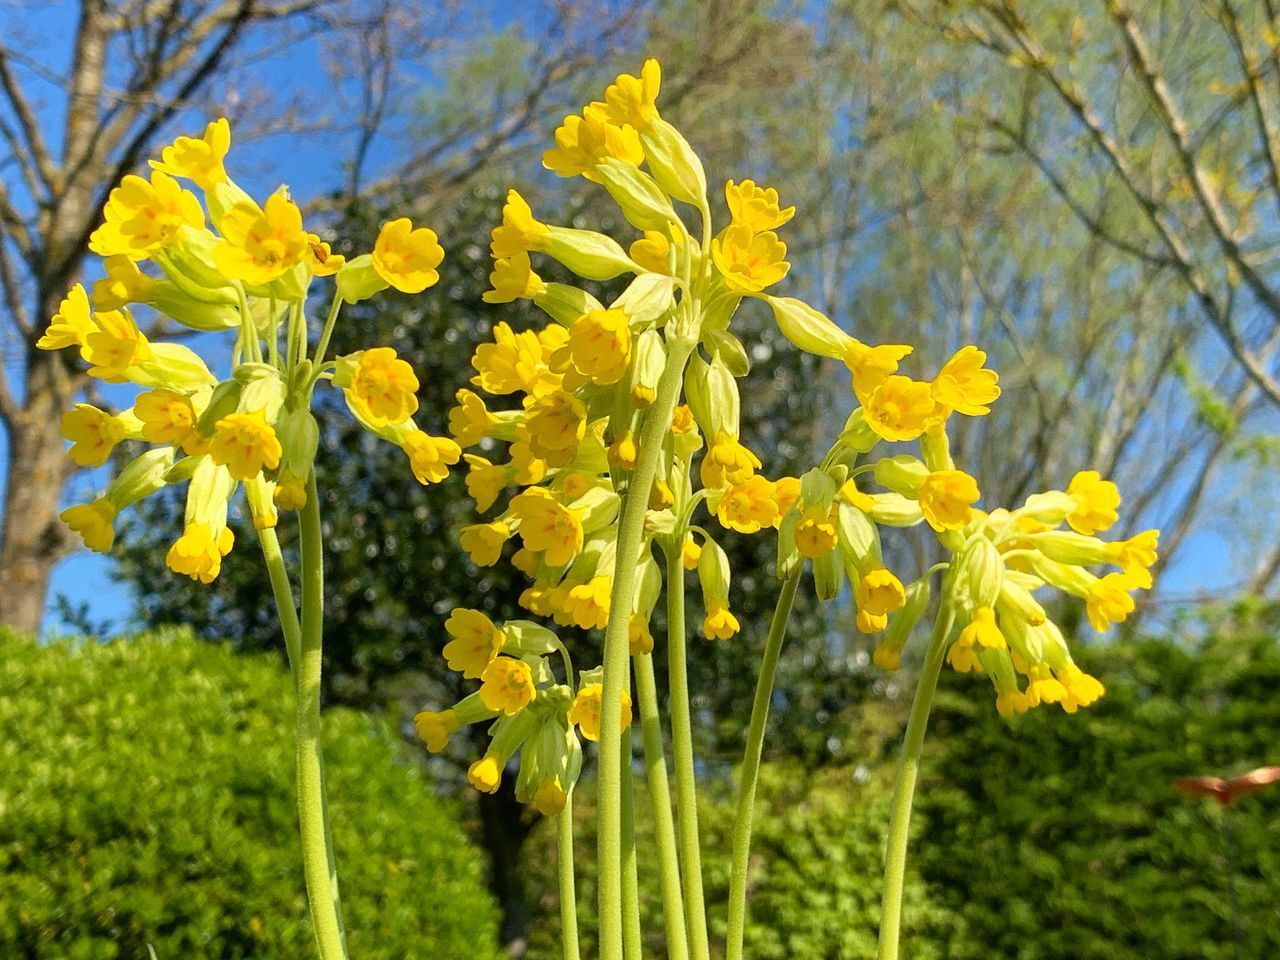 CLOSE-UP OF YELLOW FLOWERING PLANT IN FIELD